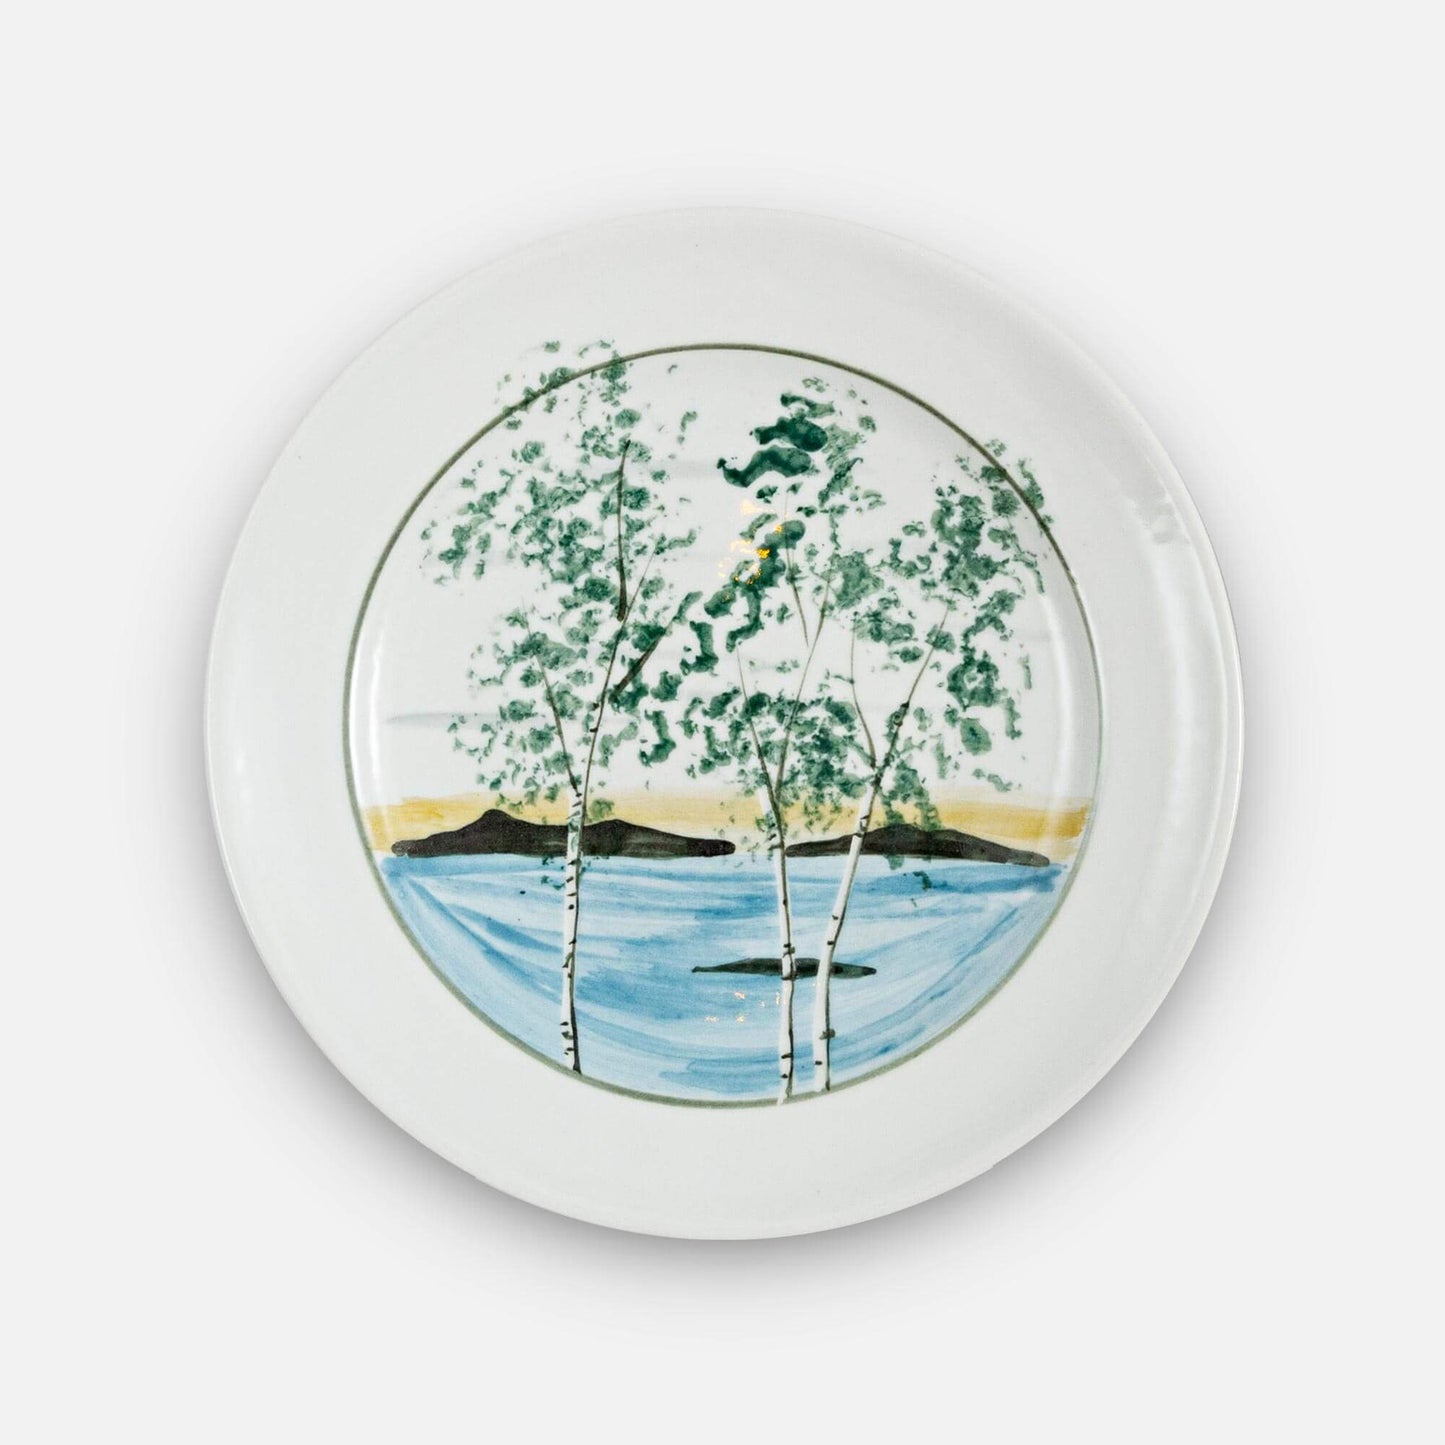 Handmade Pottery Footed Dinner Plate in Birch Point pattern made by Georgetown Pottery in Maine